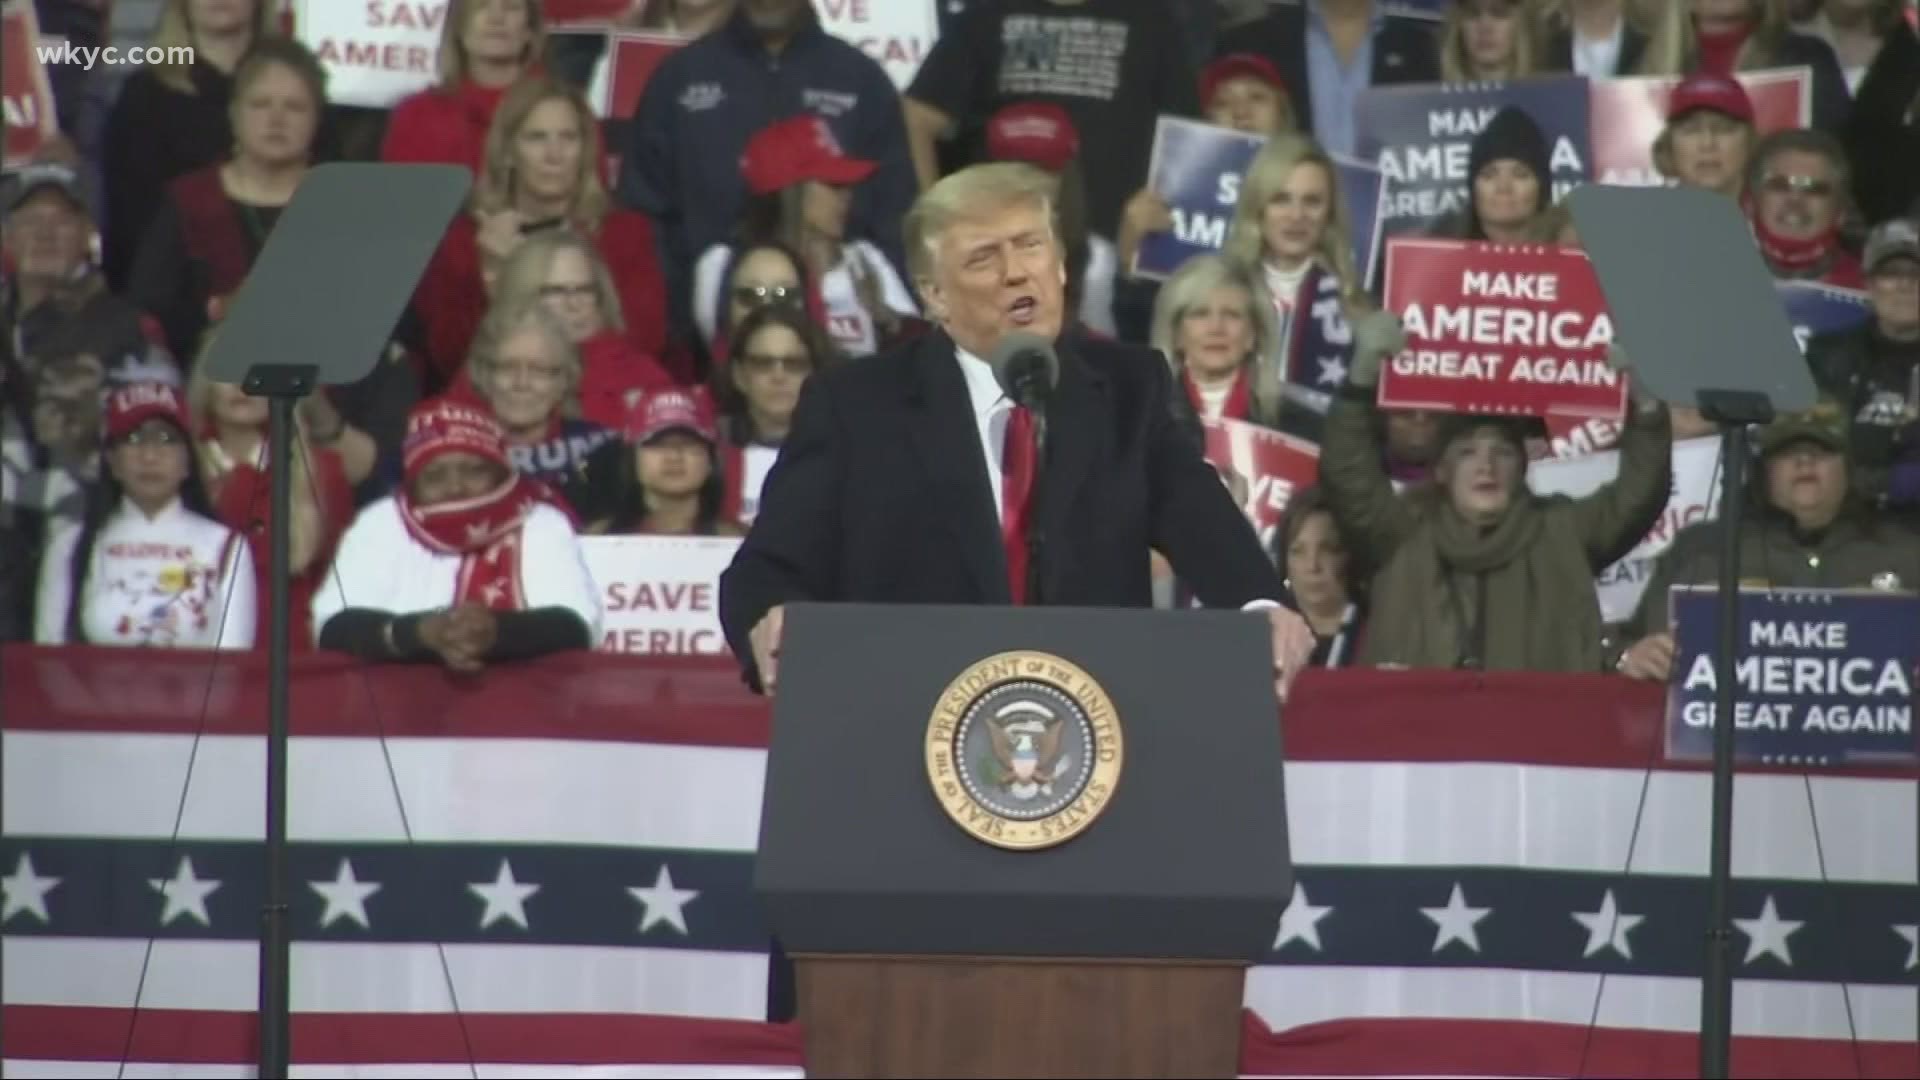 This is the first campaign appearance President Trump has made since losing the election. The two runoff elections will decide control over the Senate.